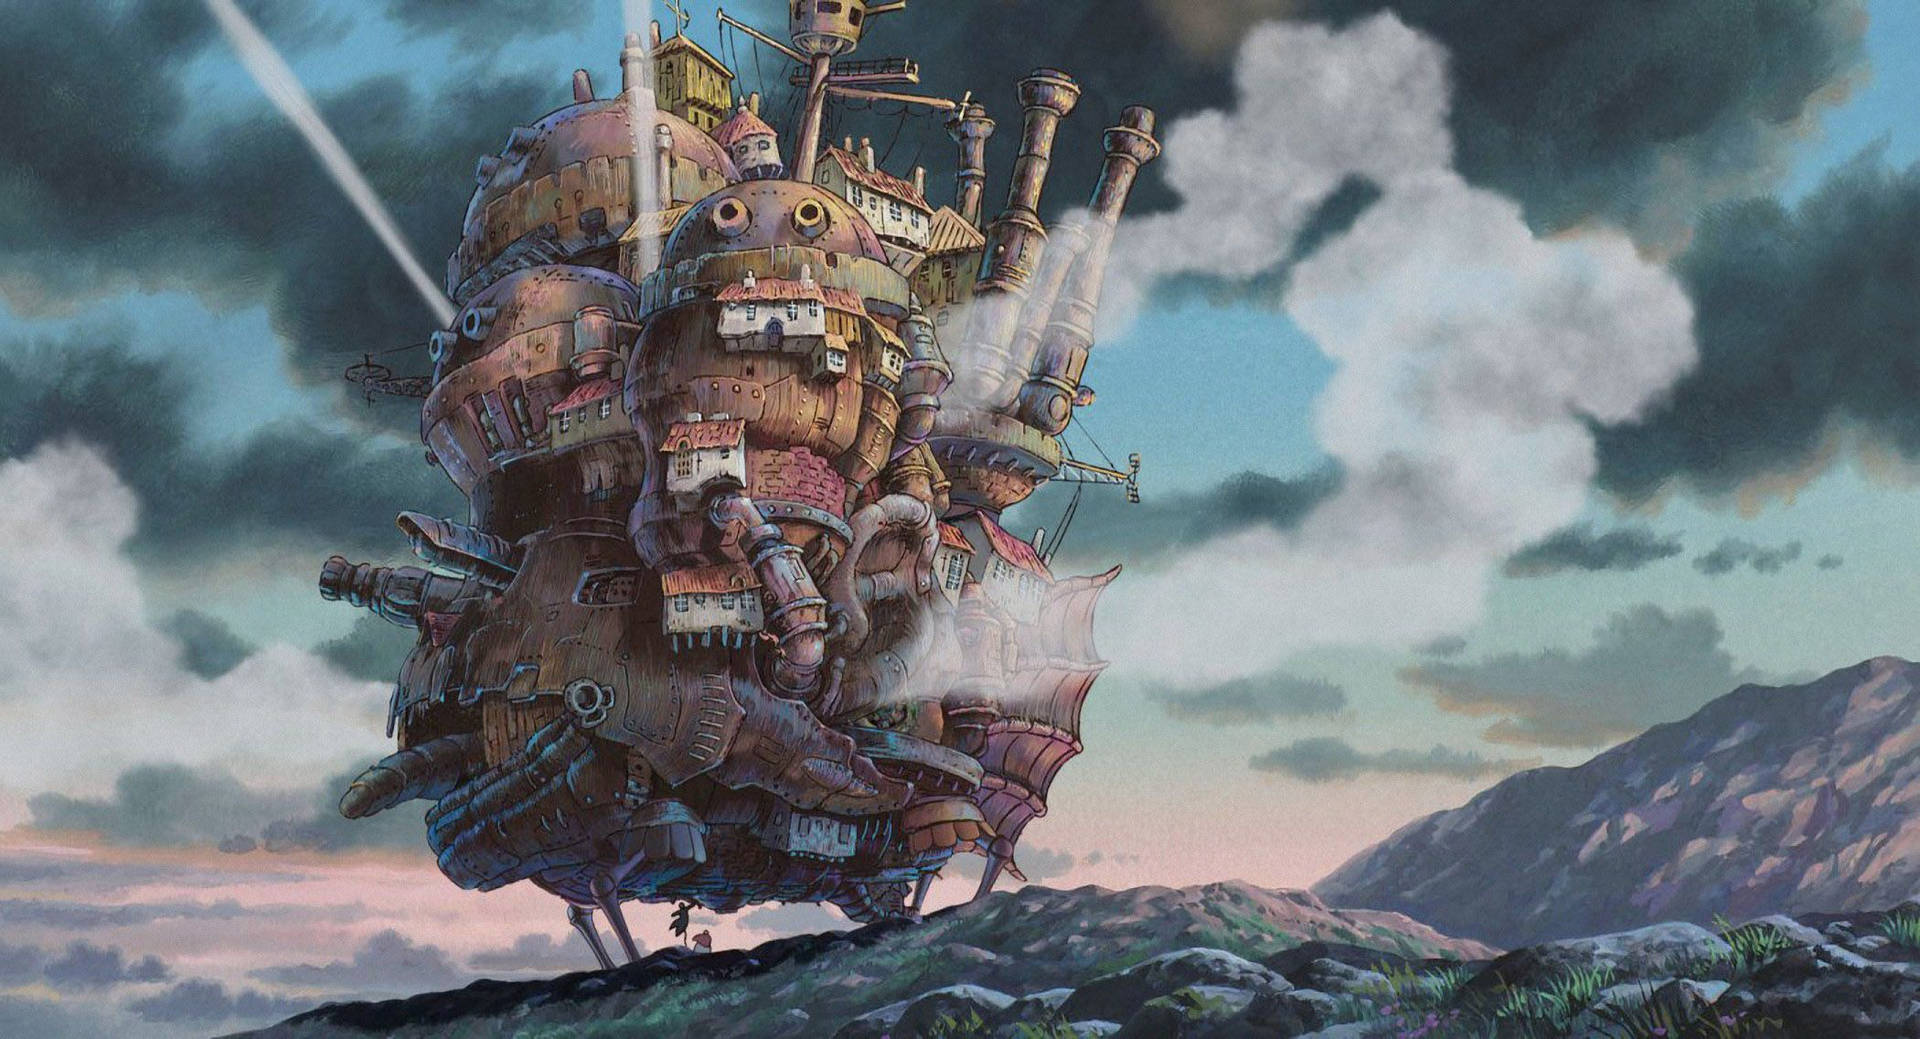 Free Howl's Moving Castle Wallpaper Downloads, [100+] Howl's Moving Castle  Wallpapers for FREE 